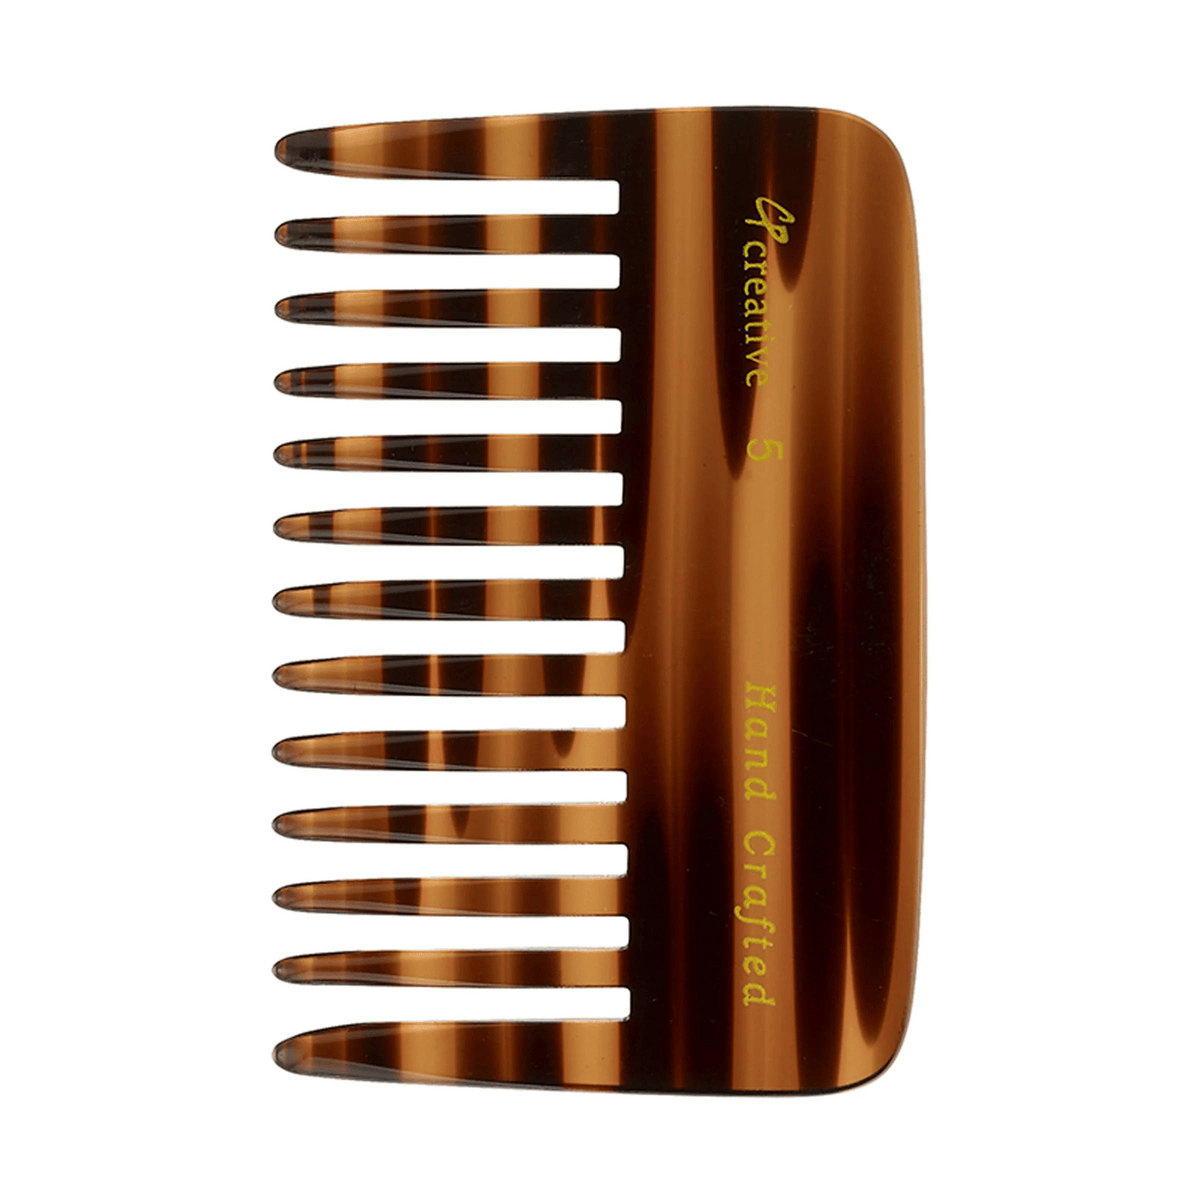 Primary Image of C5 Wide Tooth 4 Inch Tortoise Hair Comb